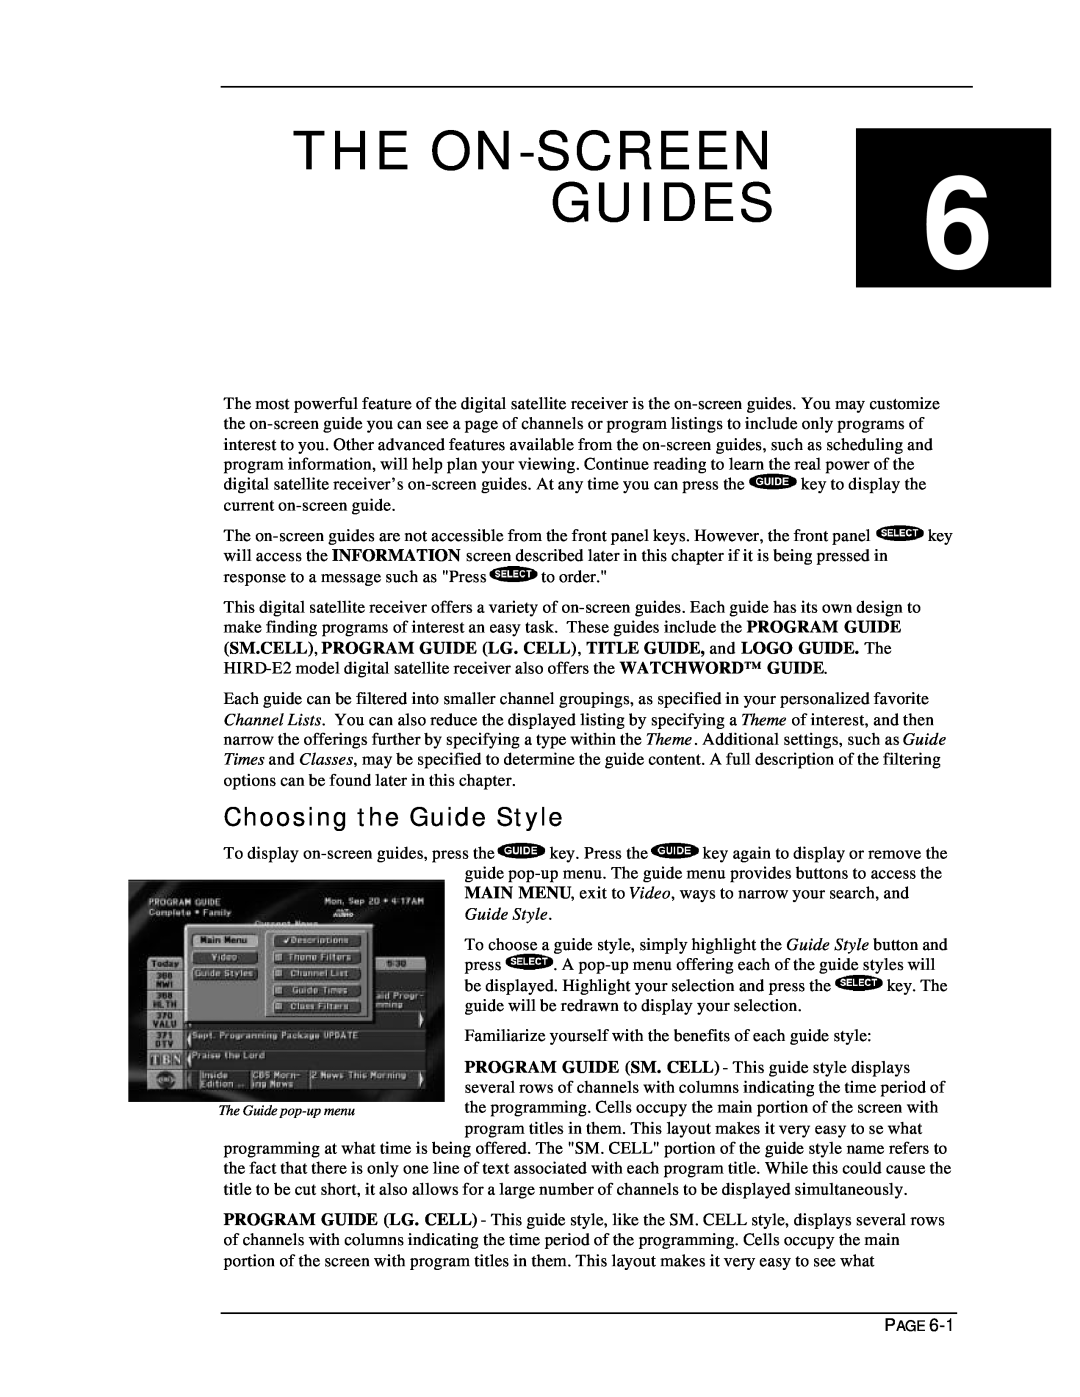 DirecTV HIRD-E11, HIRD-E25 owner manual The On-Screenguides, Choosing the Guide Style 